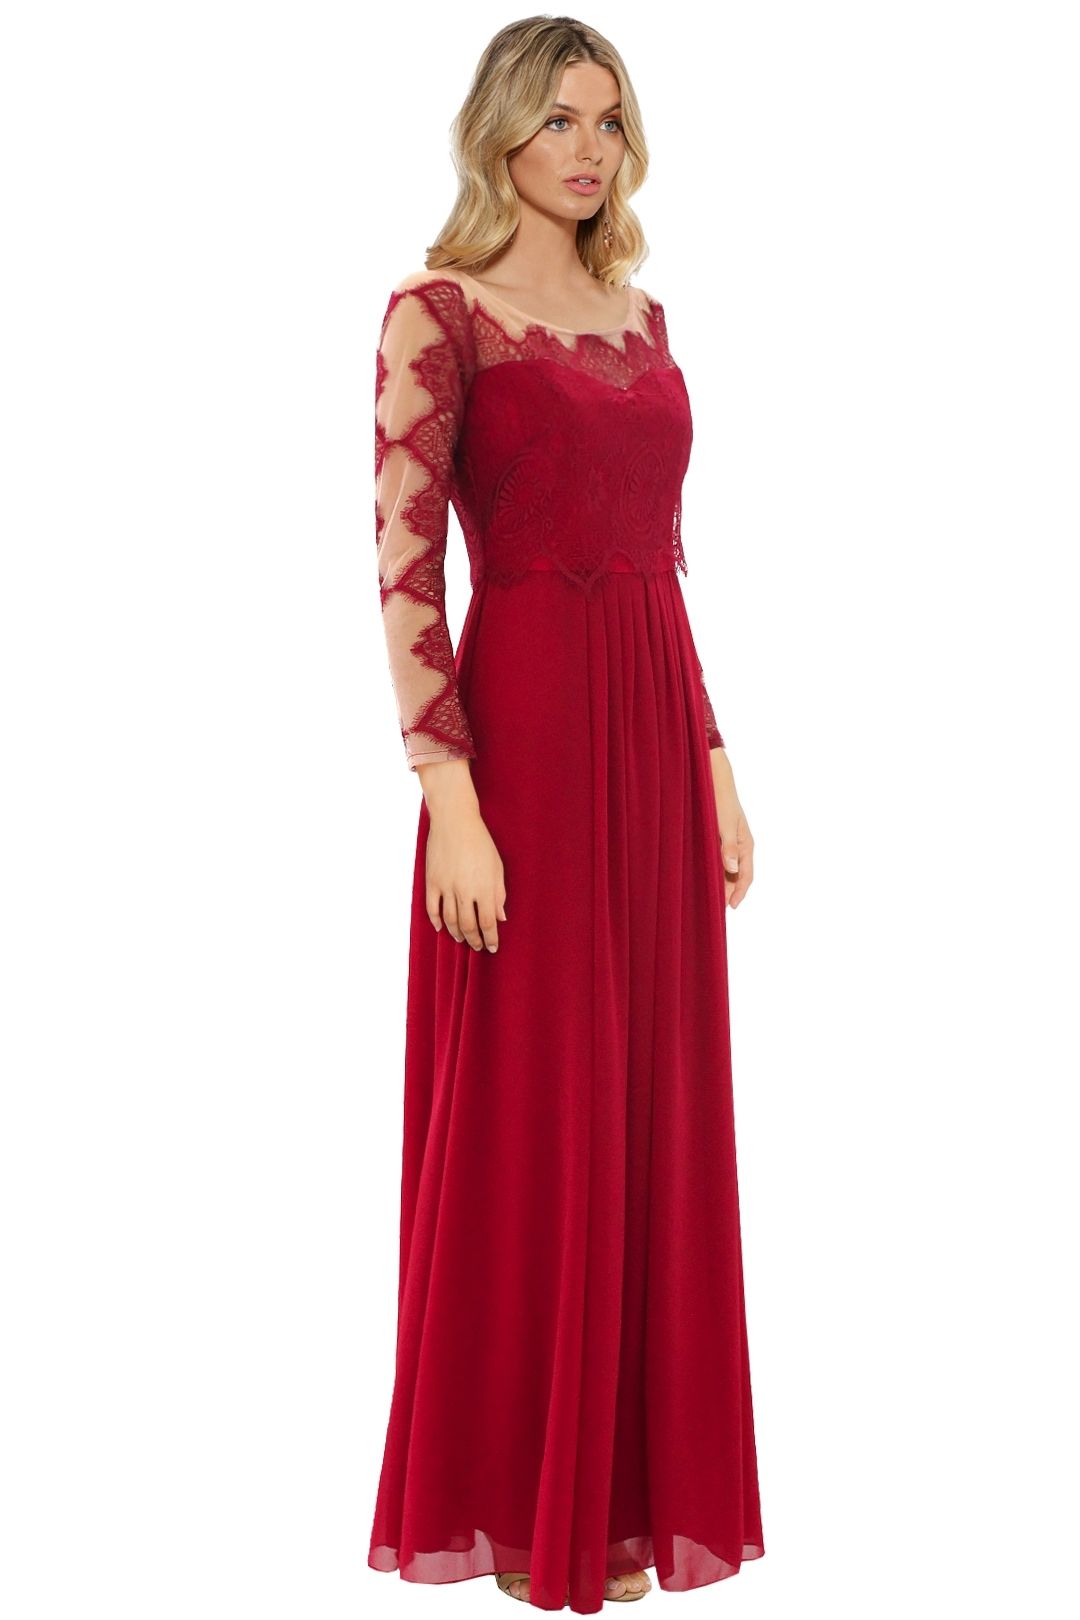 The Dress Shoppe - Gone With The Edge Gown - Red - Side